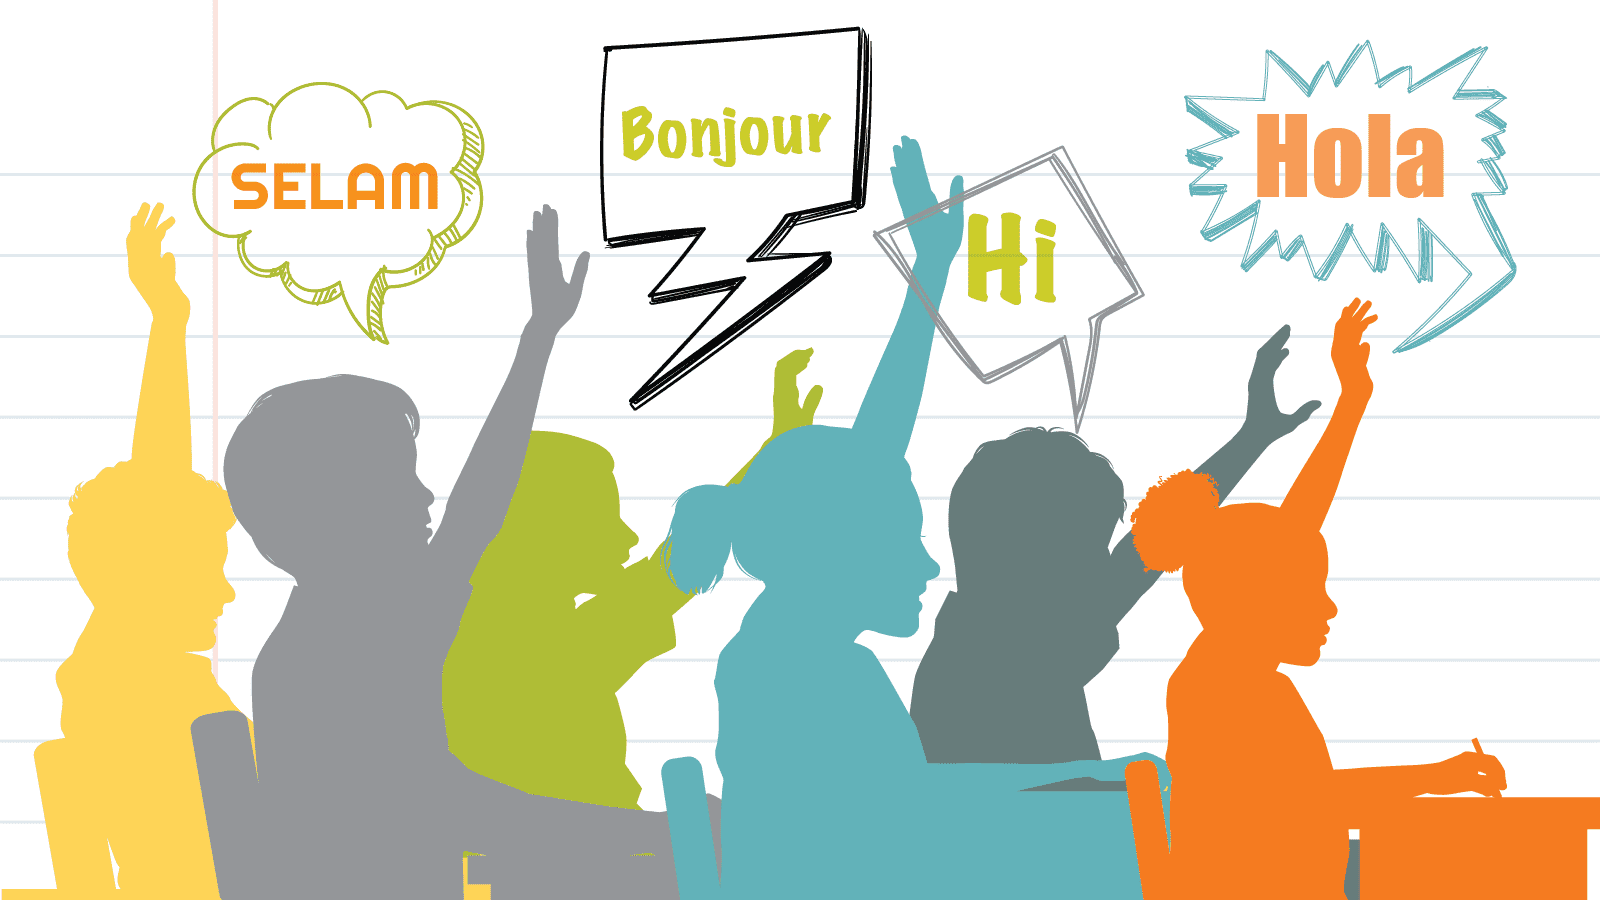 illustration of students in a classroom with their hands raised and speech bubbles that say hello in different languages